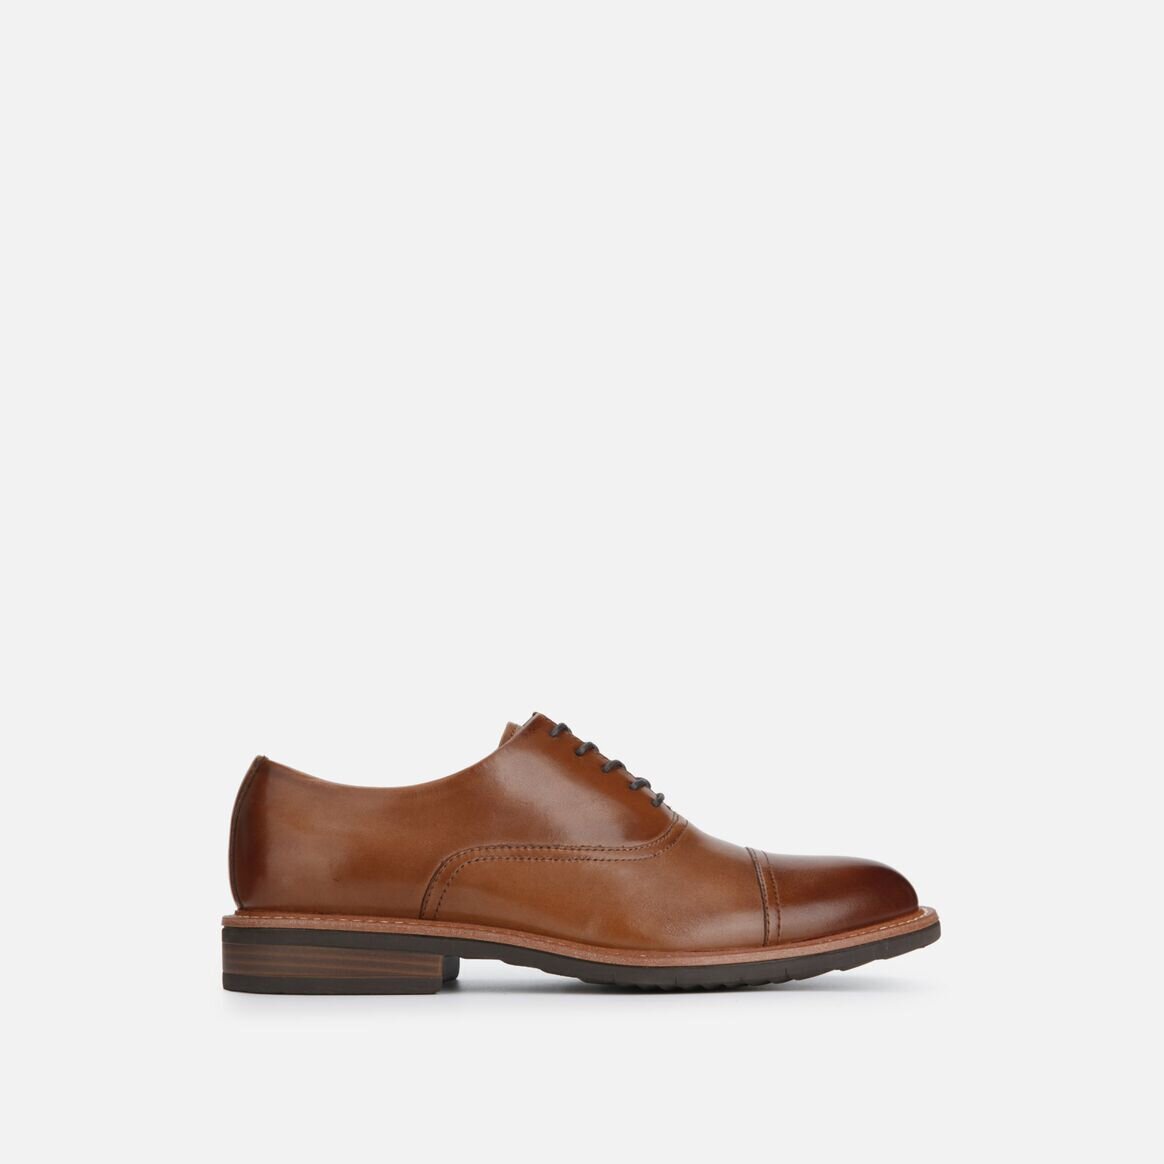 Kenneth Cole - Klay Cap Toe Oxford with Flex - RMS9039LE - From Php 7,950 to 4,373.jpg